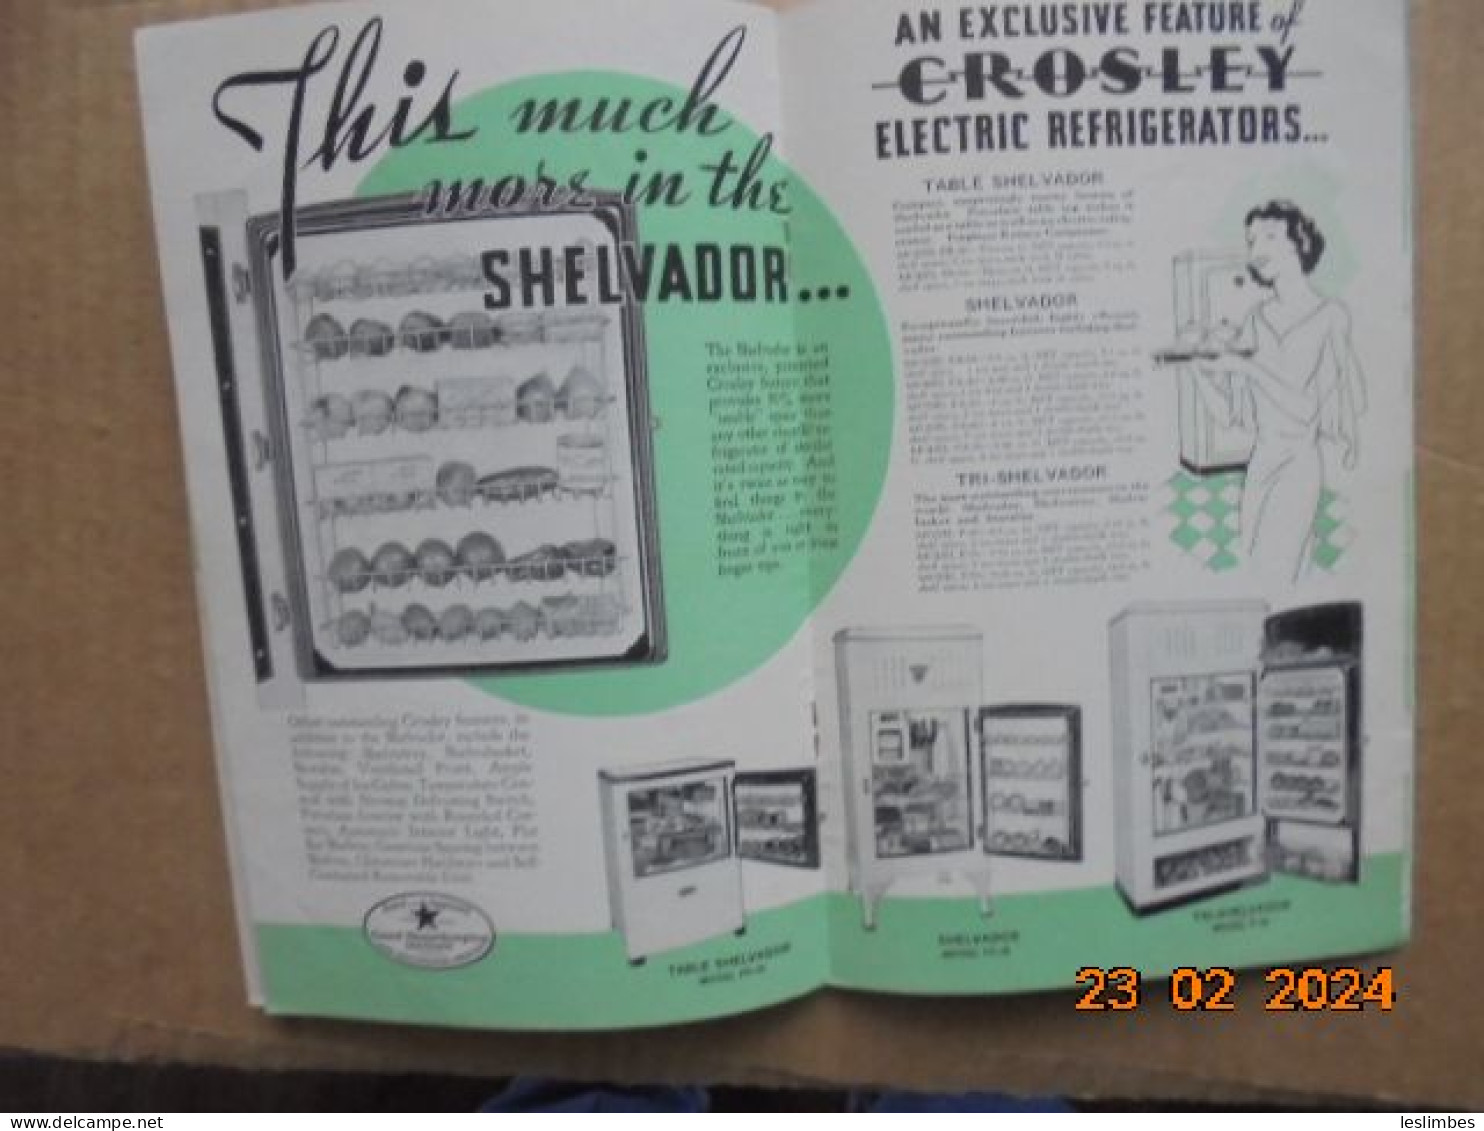 Delicious Frozen Dishes Made In The Crosley Shelvador And Tri-Shelvador Electric Refrigerator - American (US)